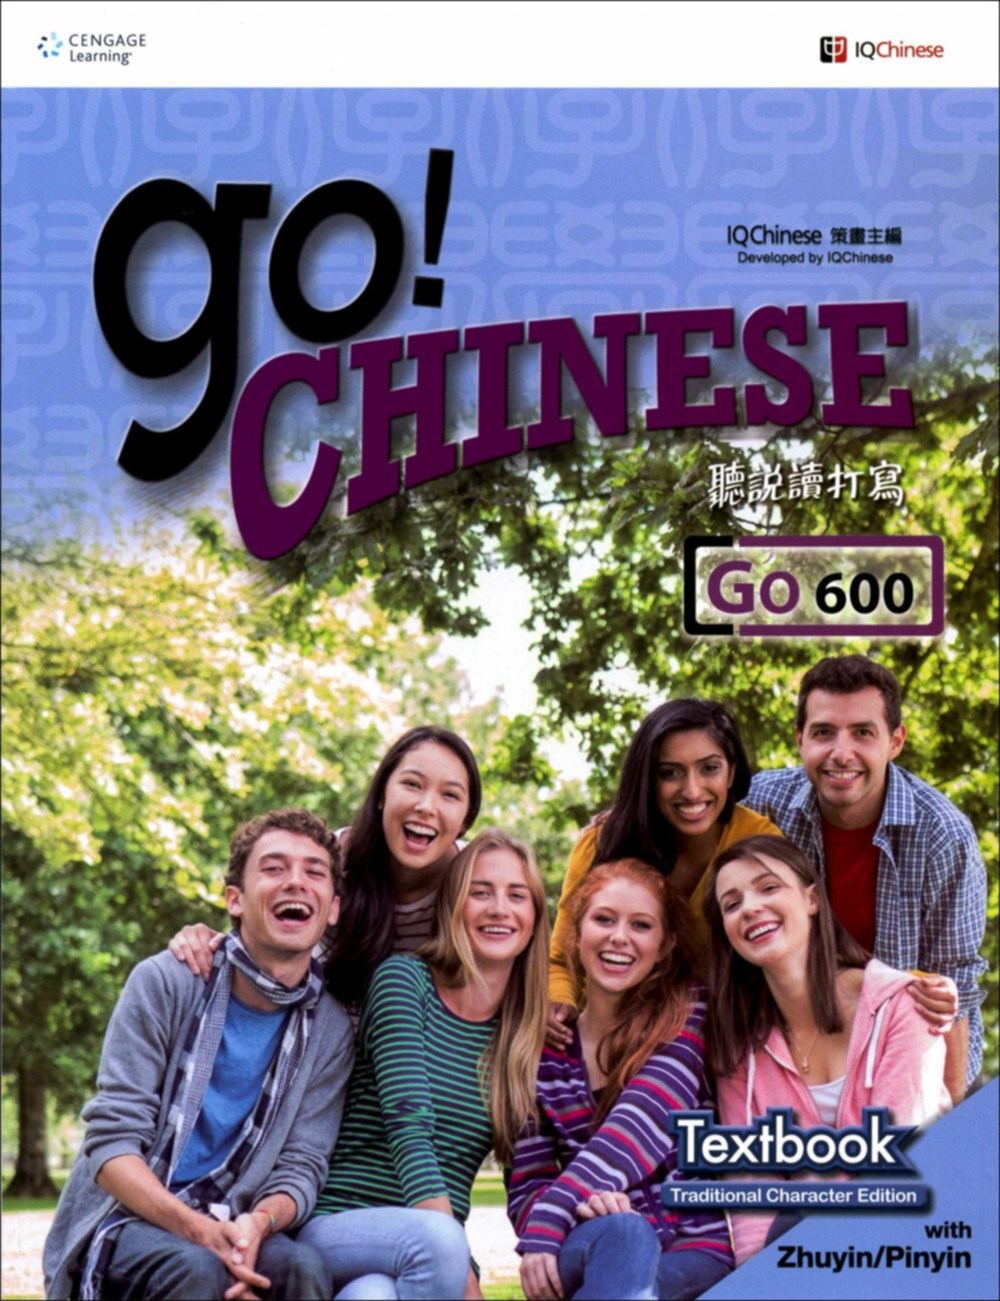 Go! Chinese Go600 Textbook (Traditional Character Edition with Zhuyin/Pinyin)